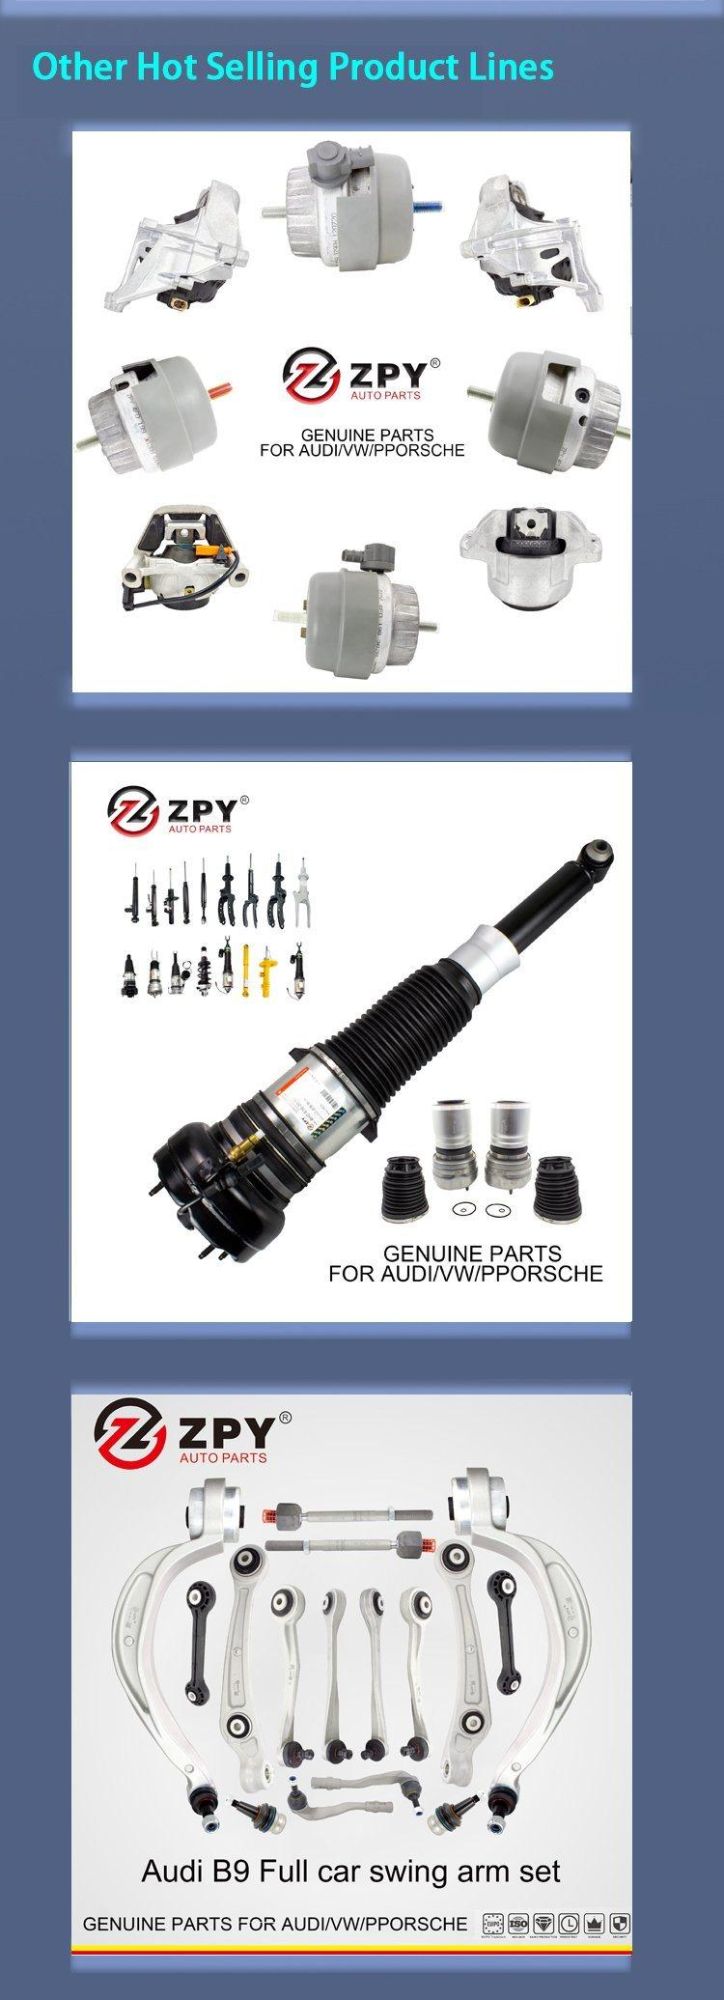 Zpy Topselling New Genuine Window Regulator 8e0837461 for Audi A4